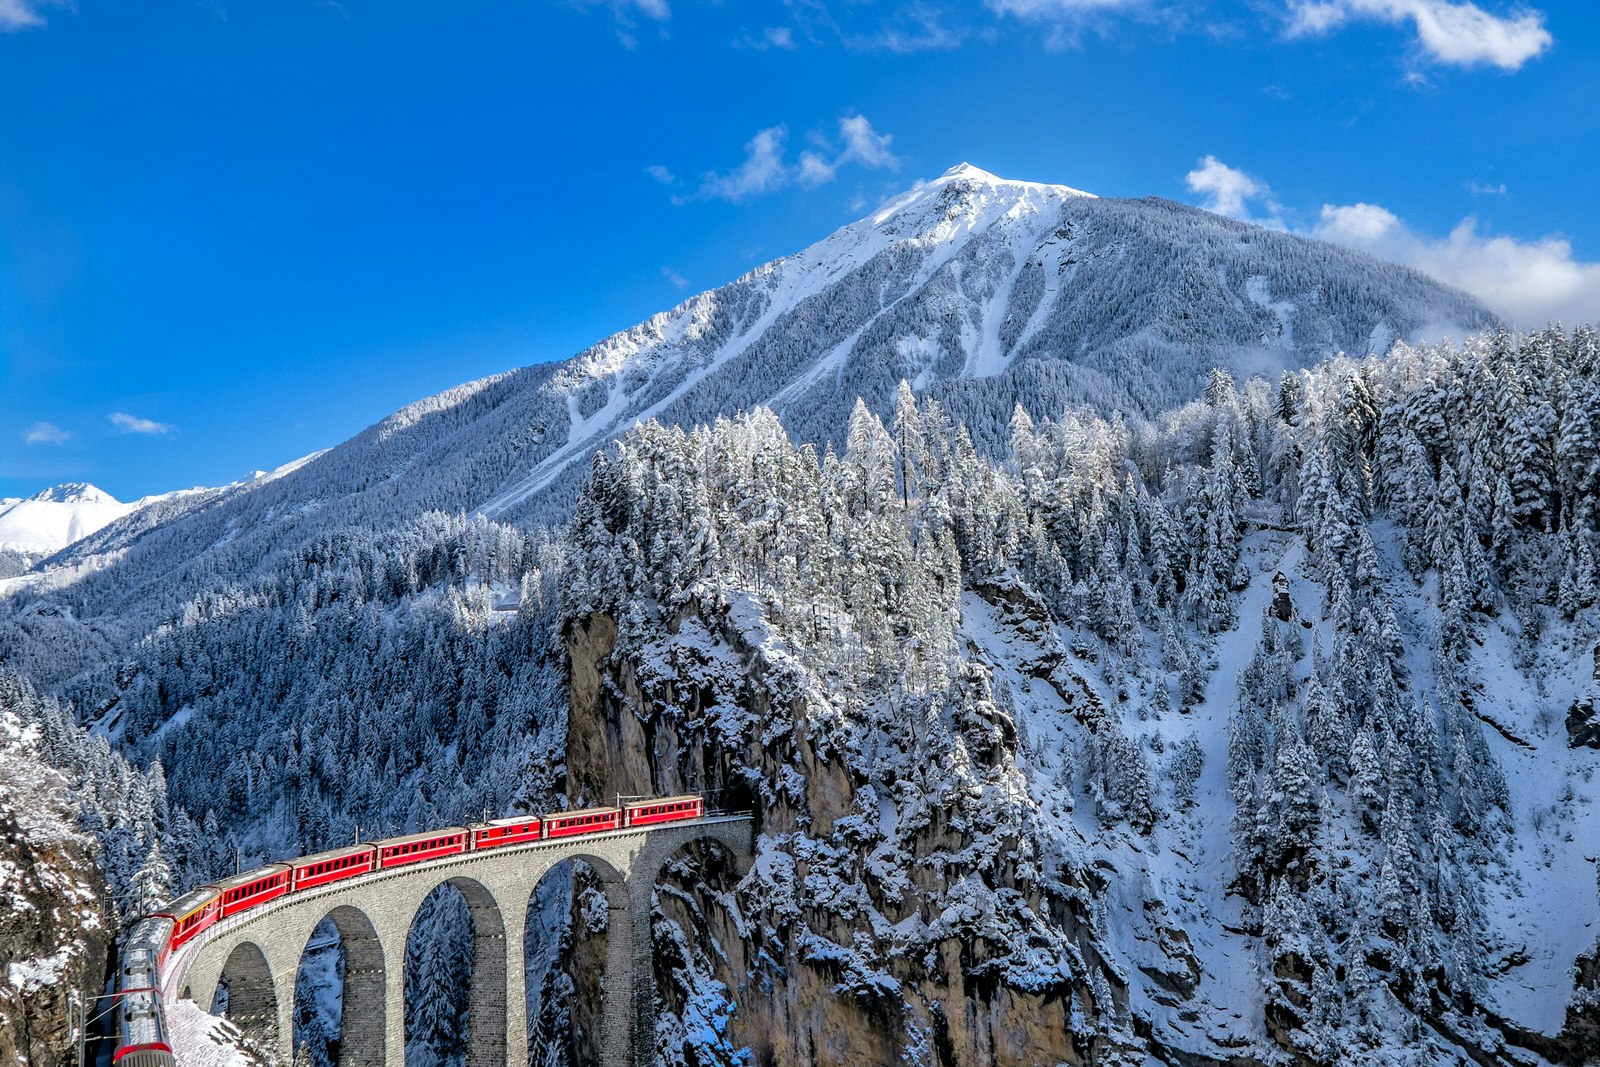 The bright red Glacier Express train cuts through rugged mountains covered in snow and trees under a clear blue sky